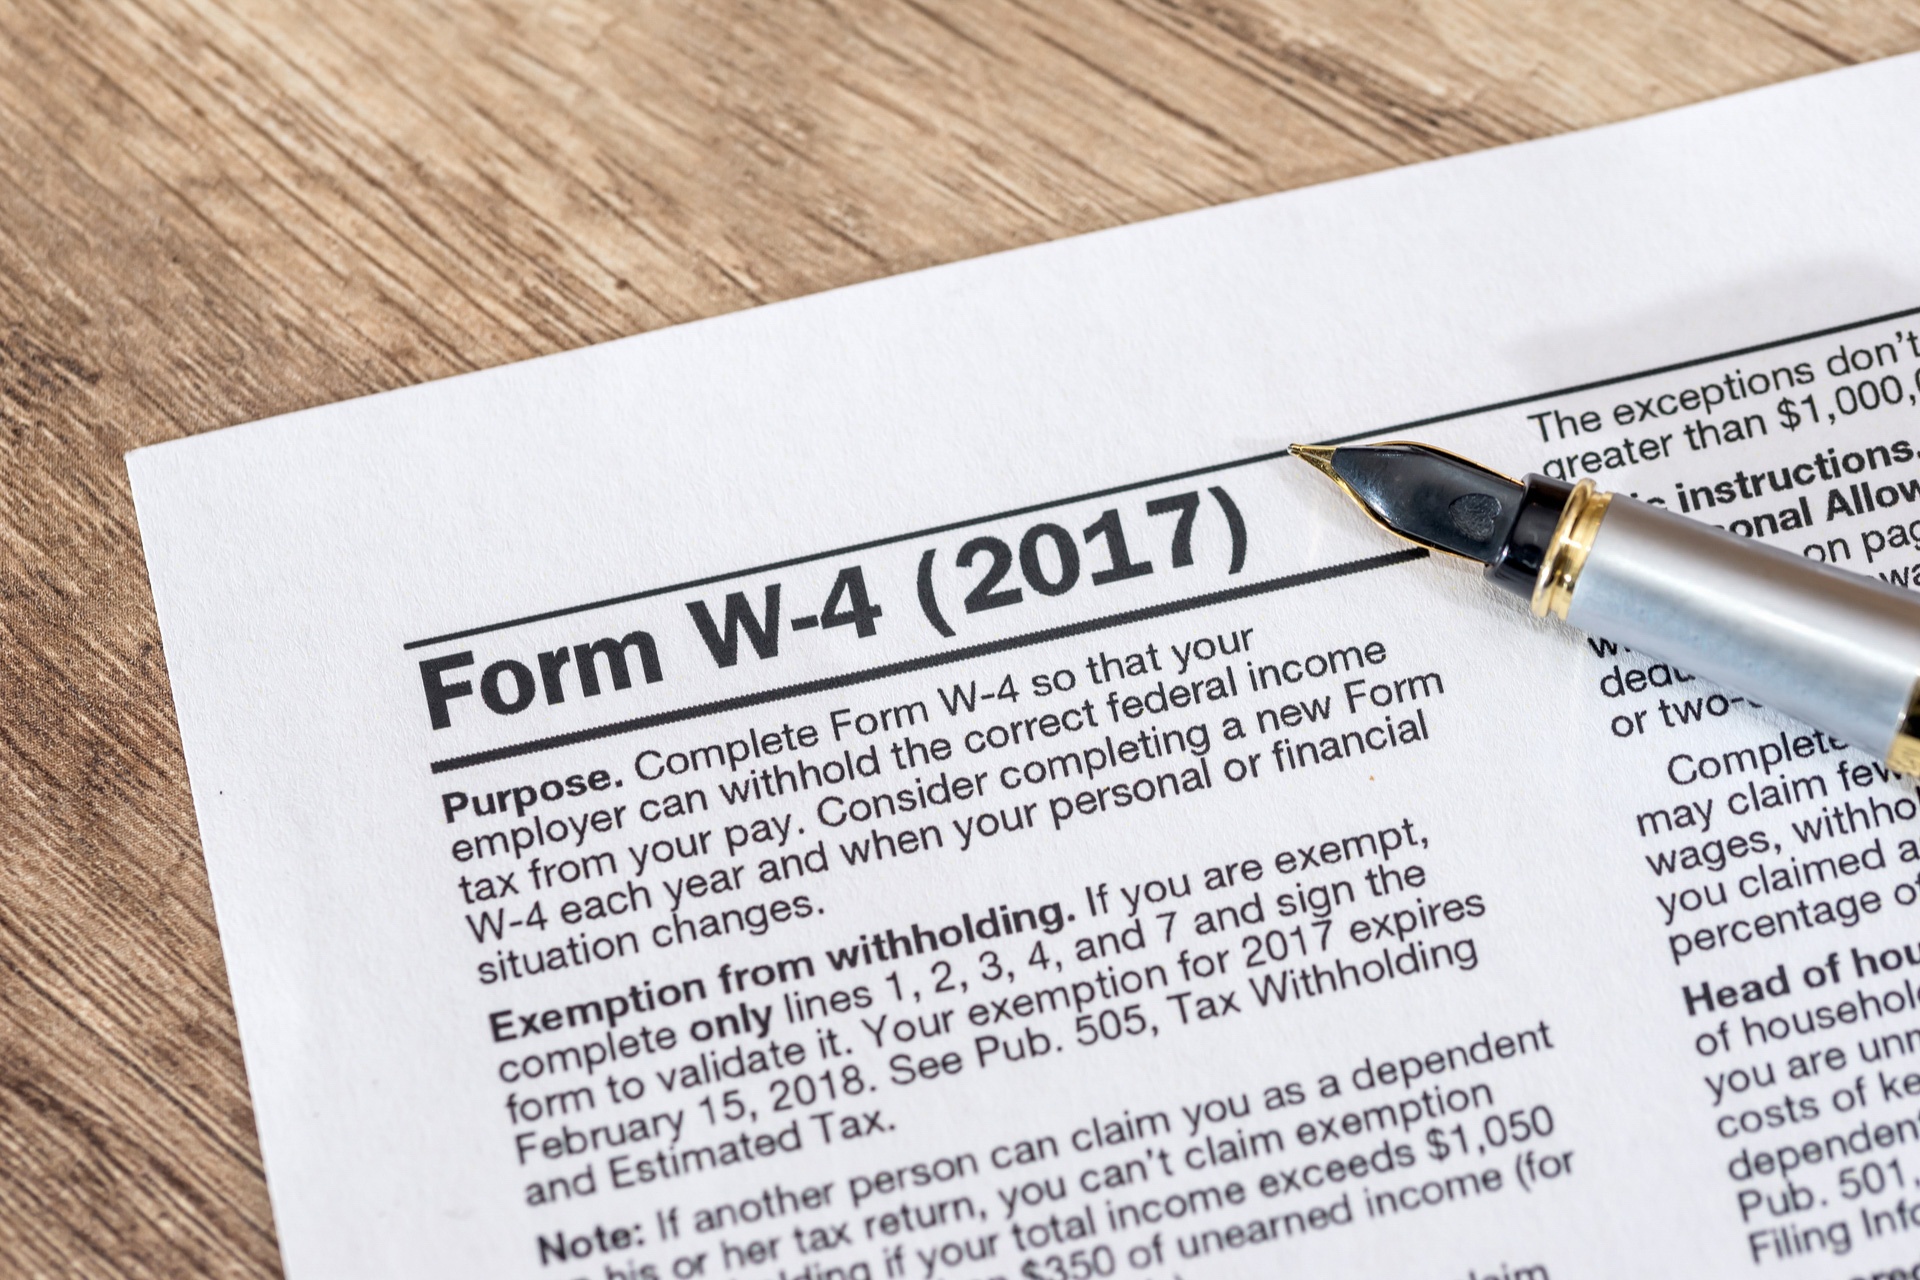 Irs Releases New Tax Withholding Tables For 2018